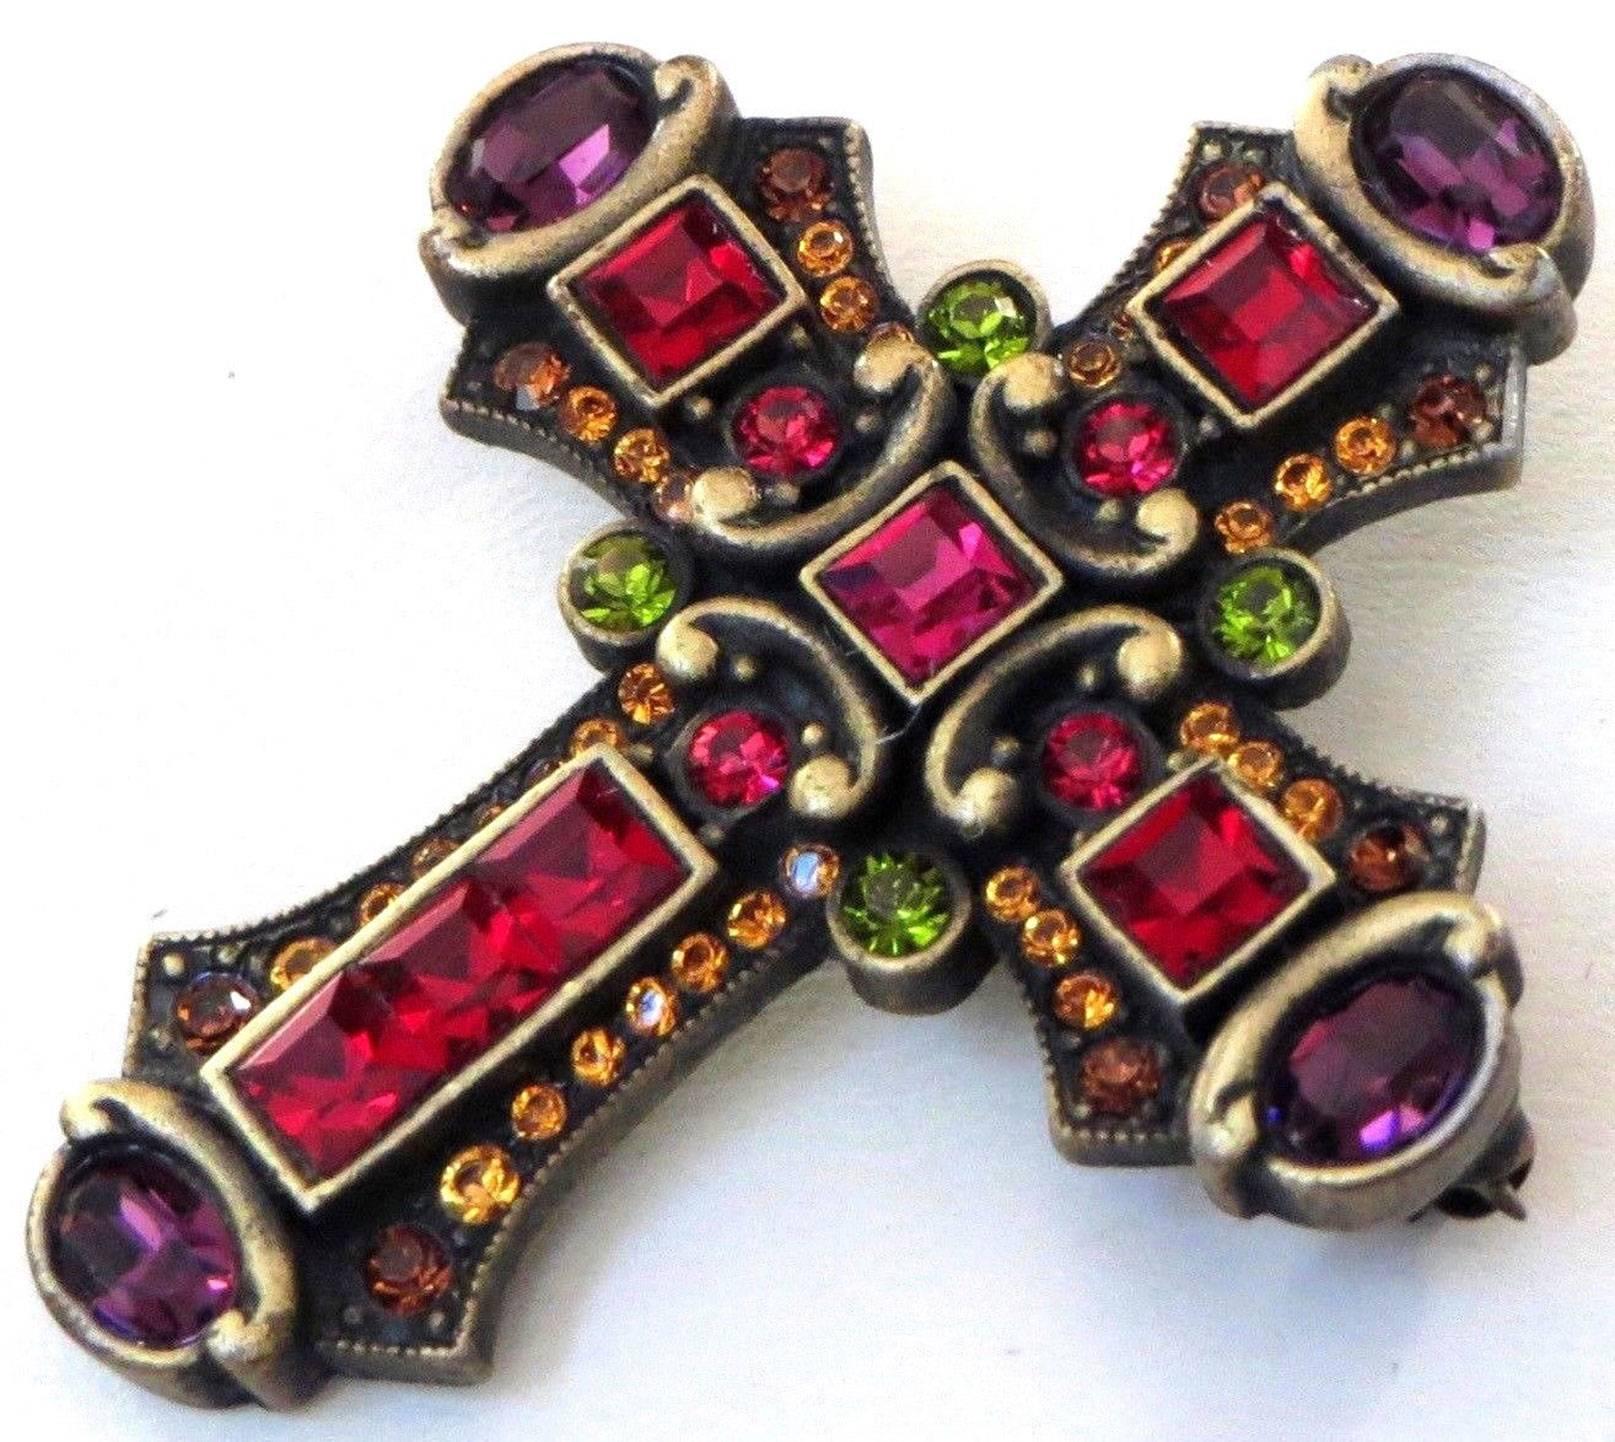 Exquisite Faux Multi-Gem Crystals Statement Cross Pin by Iconic Designer JAY STRONGWATER; set with Brilliant Red, Purple, Green, and Golden Rhinestone Embellishments. Signed in Cartouche on Reverse: JAY STRONGWATER; So Collectible and Outrageously